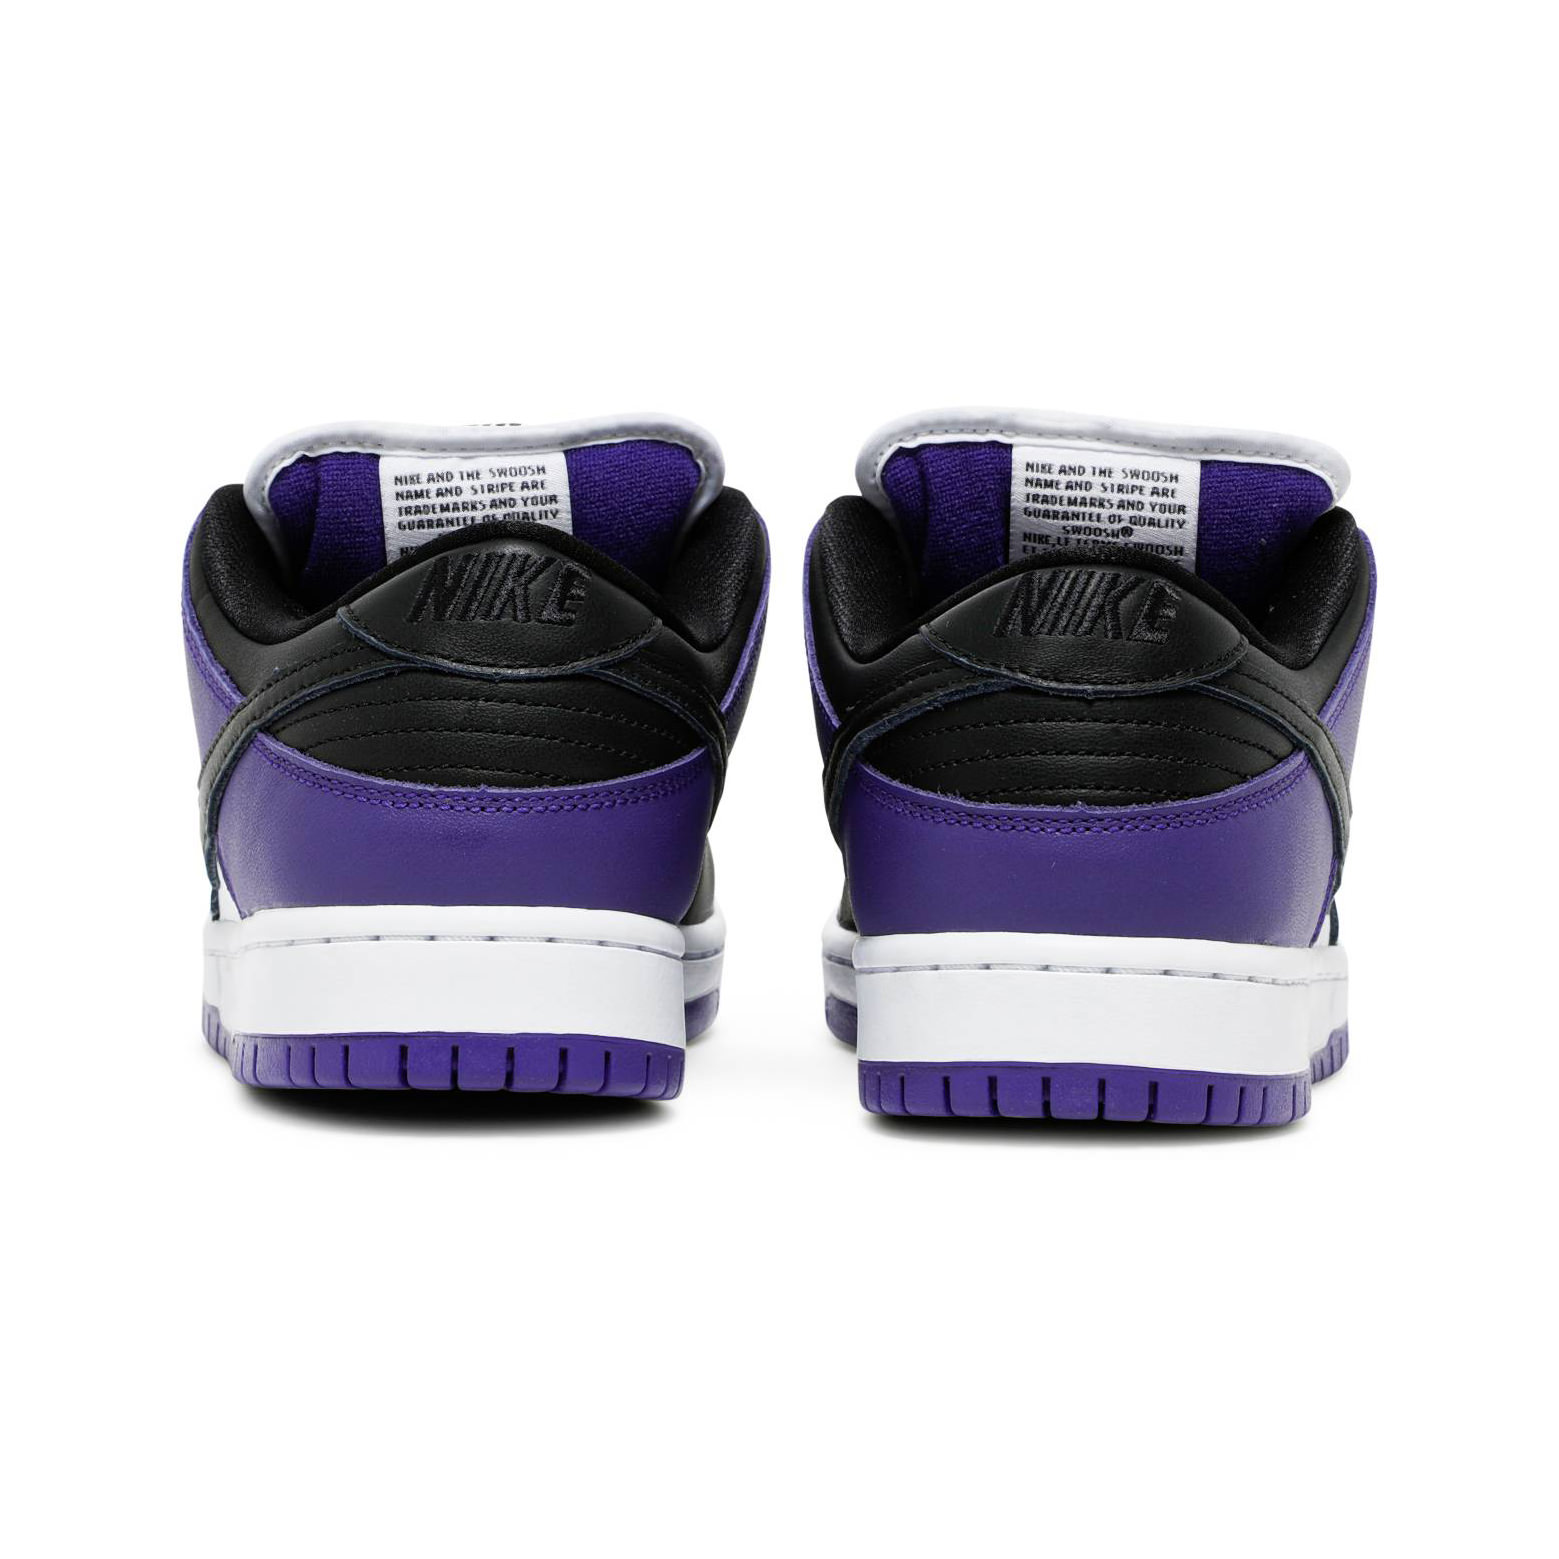 Make way for the Nike SB Dunk Low Purple Suede - The Drop Date